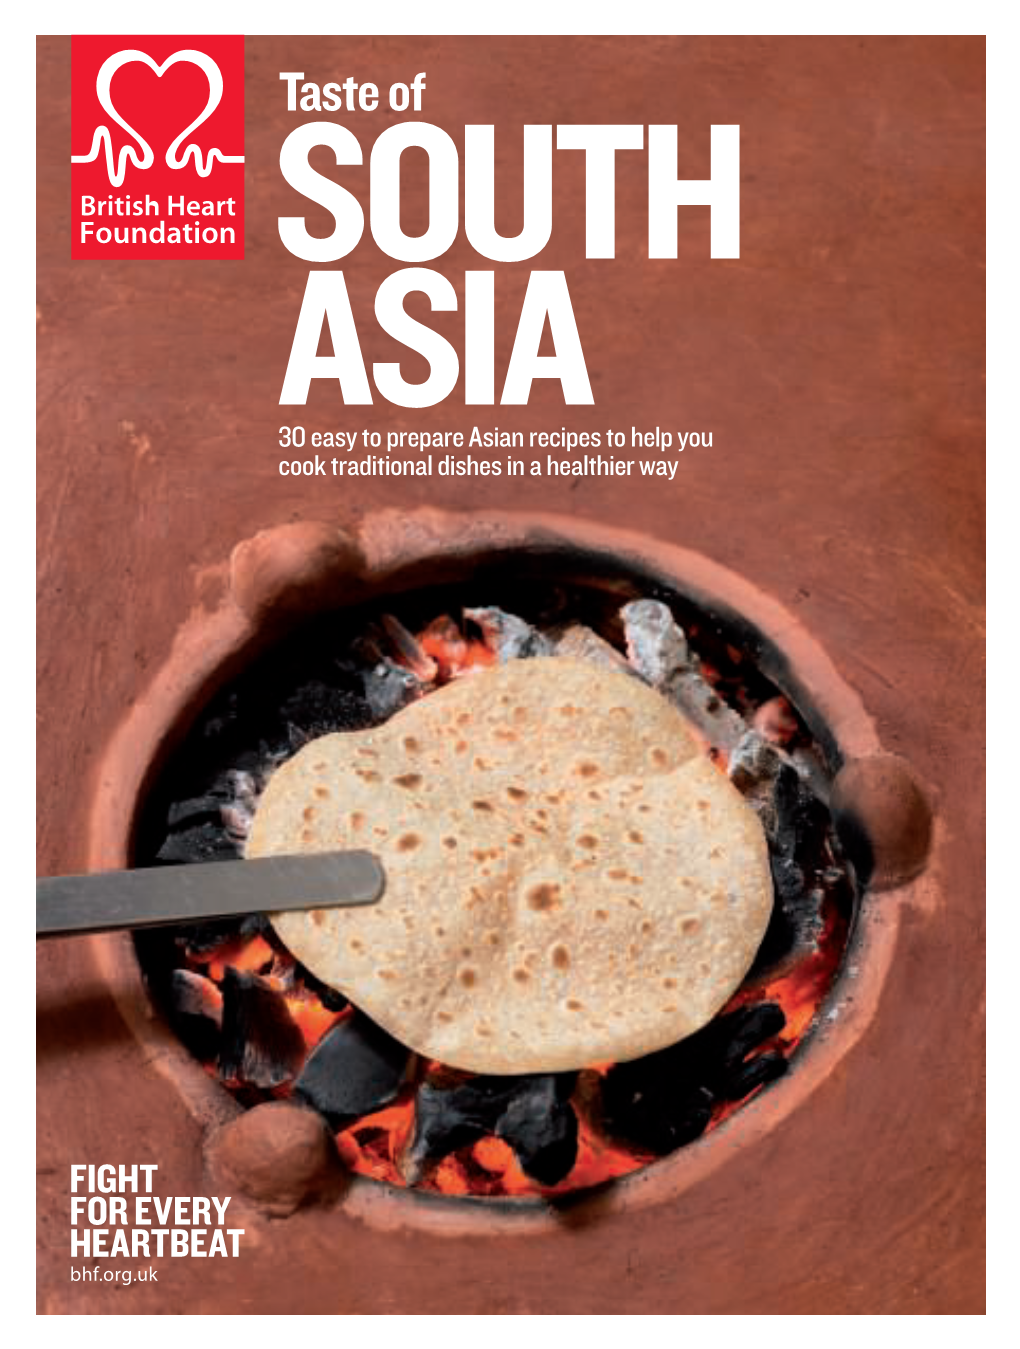 Taste of South Asia Is a Collection of Easy to Make Recipes That Can Help You Cook in a Healthier Way, Without Compromising on Taste